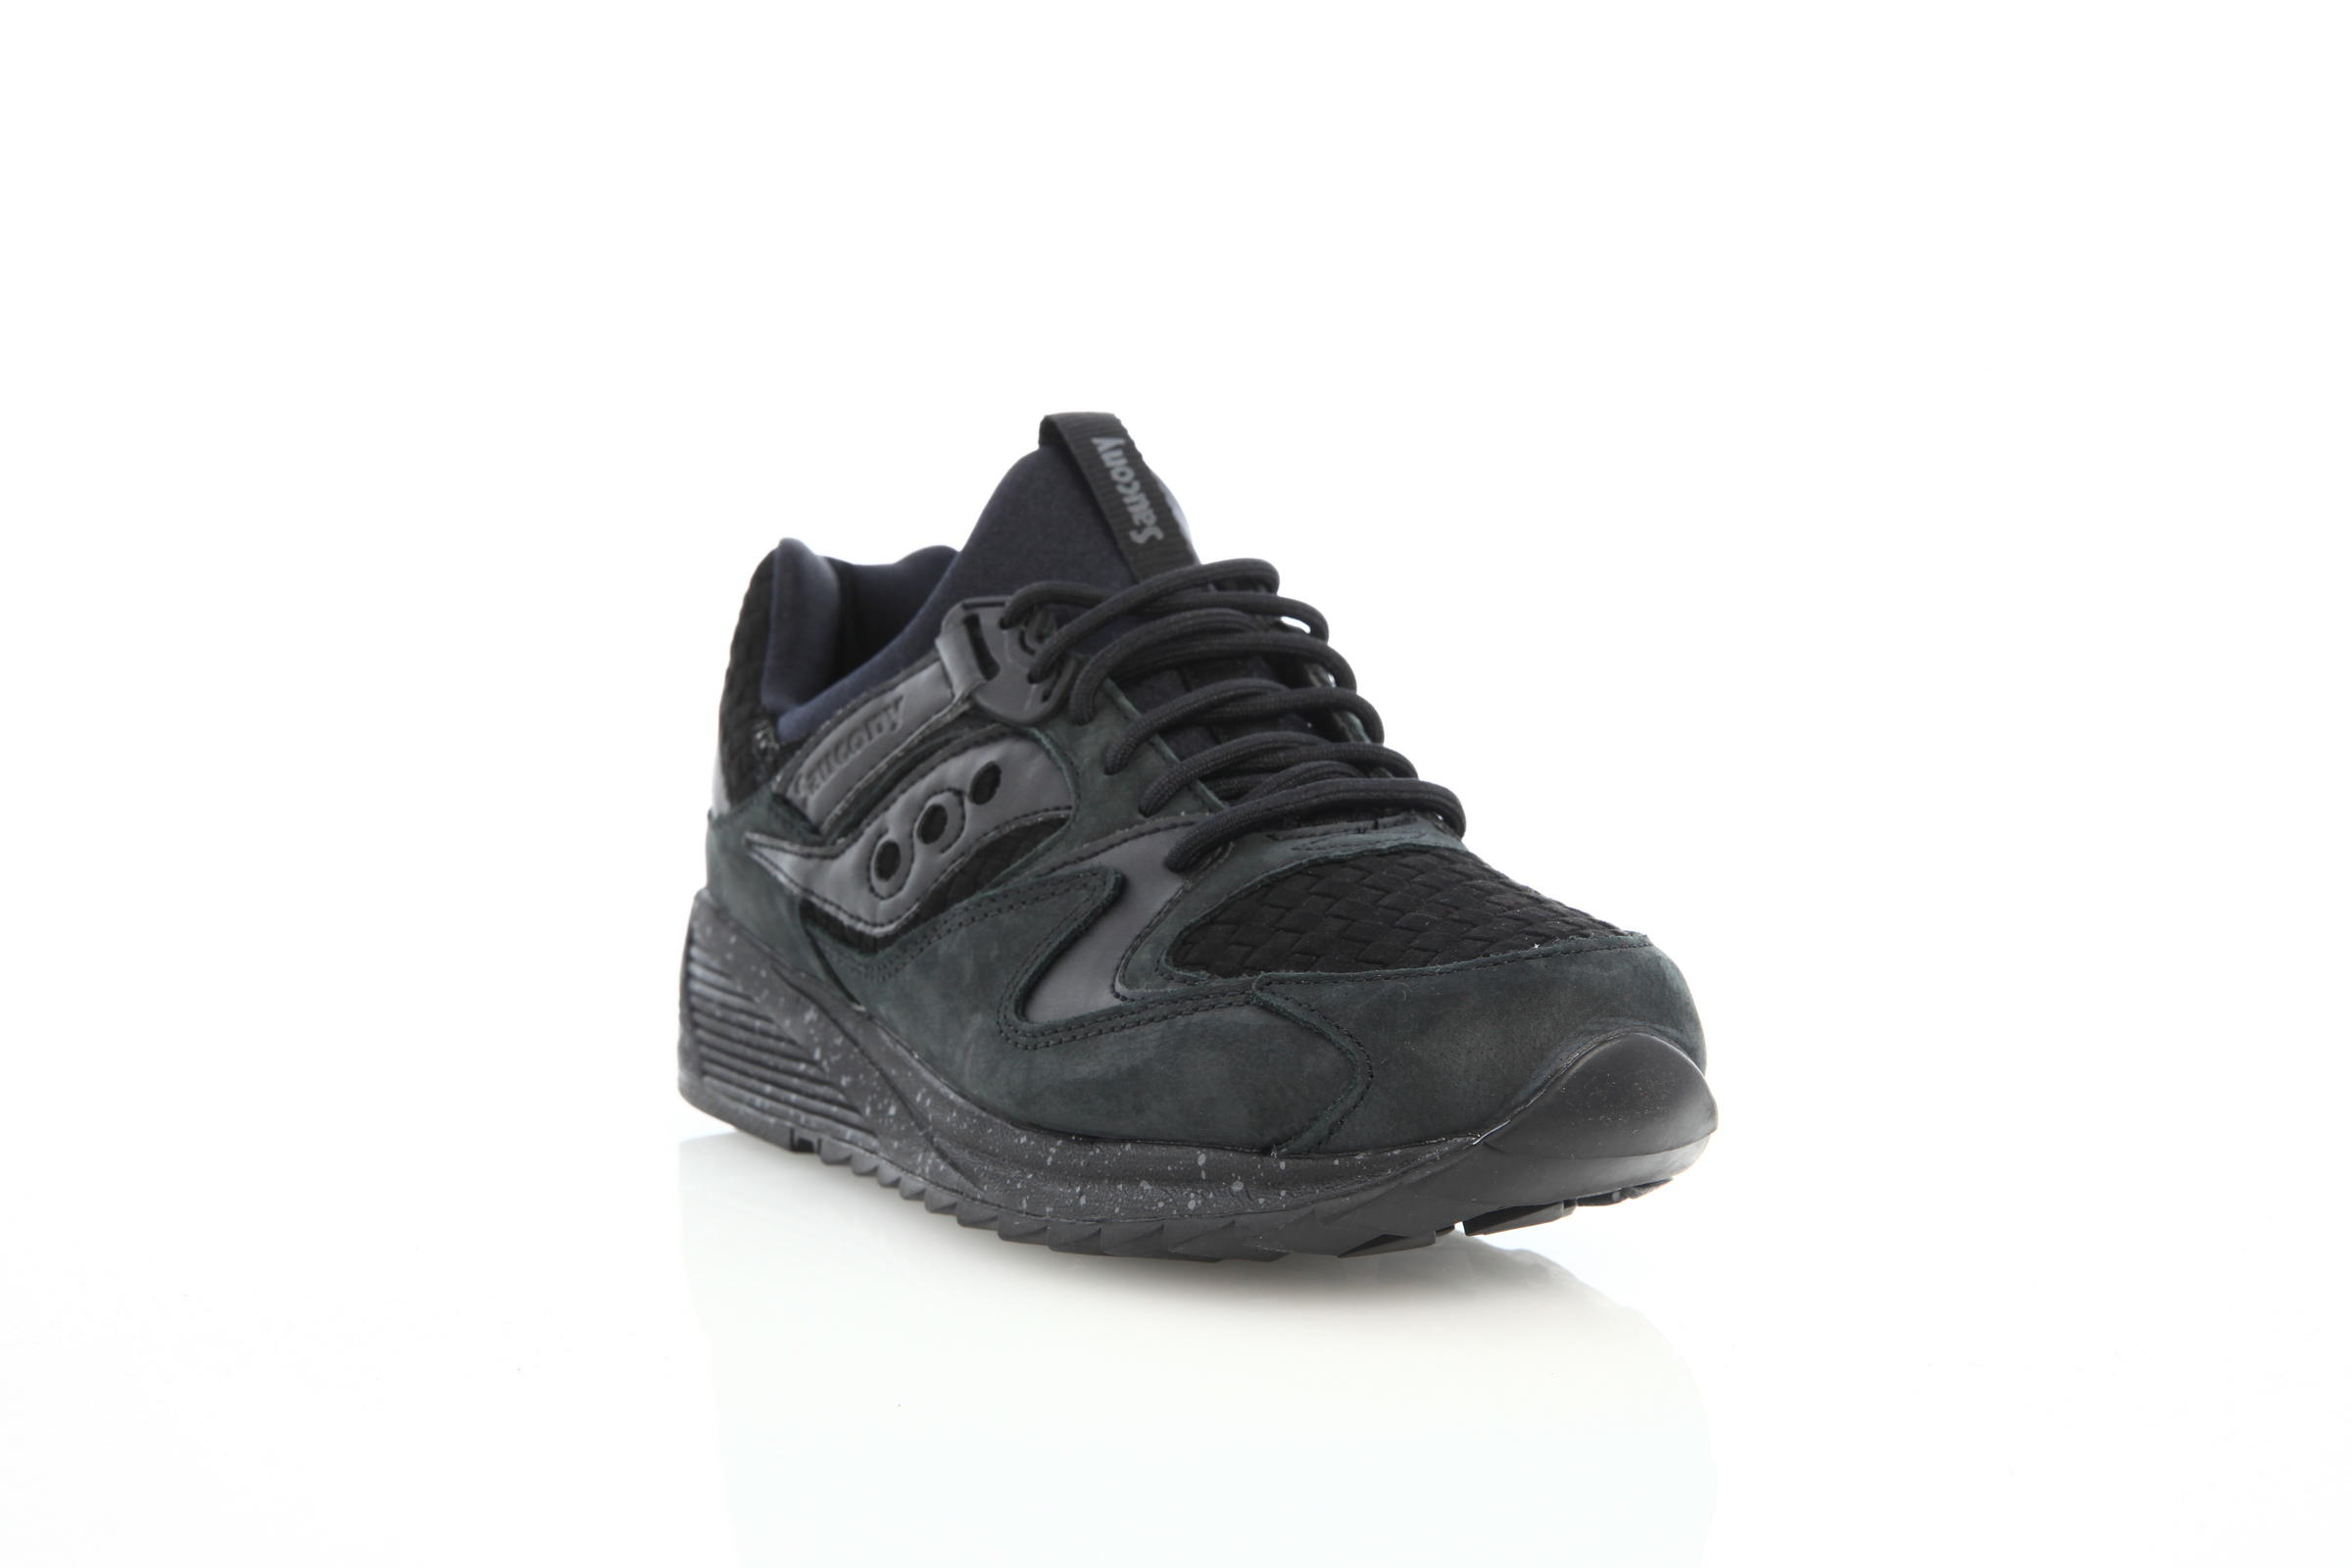 Saucony Grid 8500 Weave "All Black"